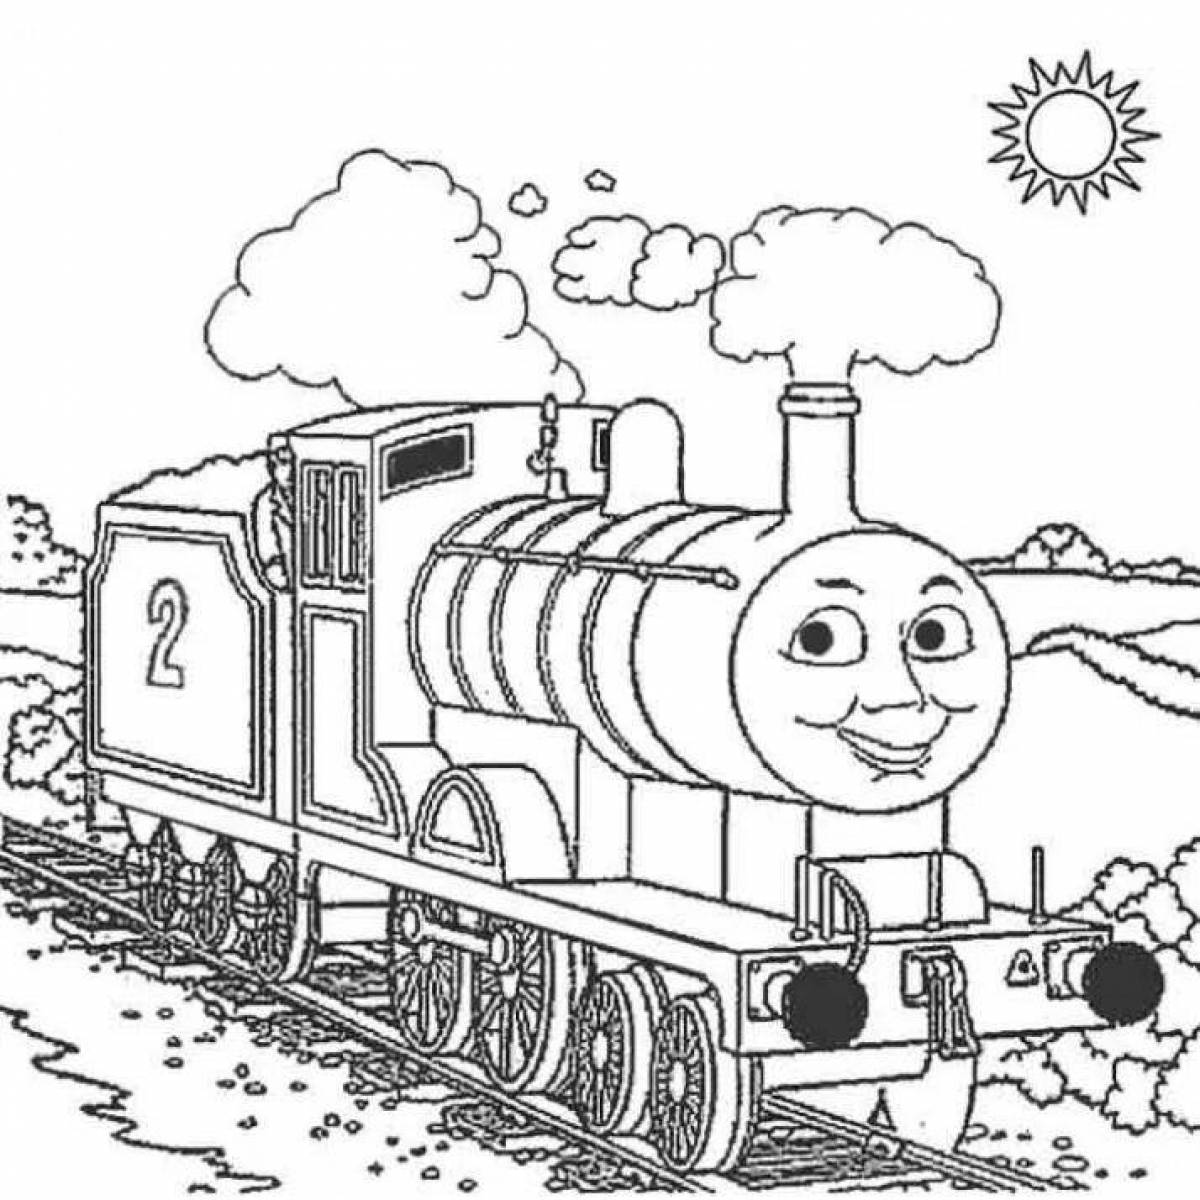 Colourful coloring charles the engine